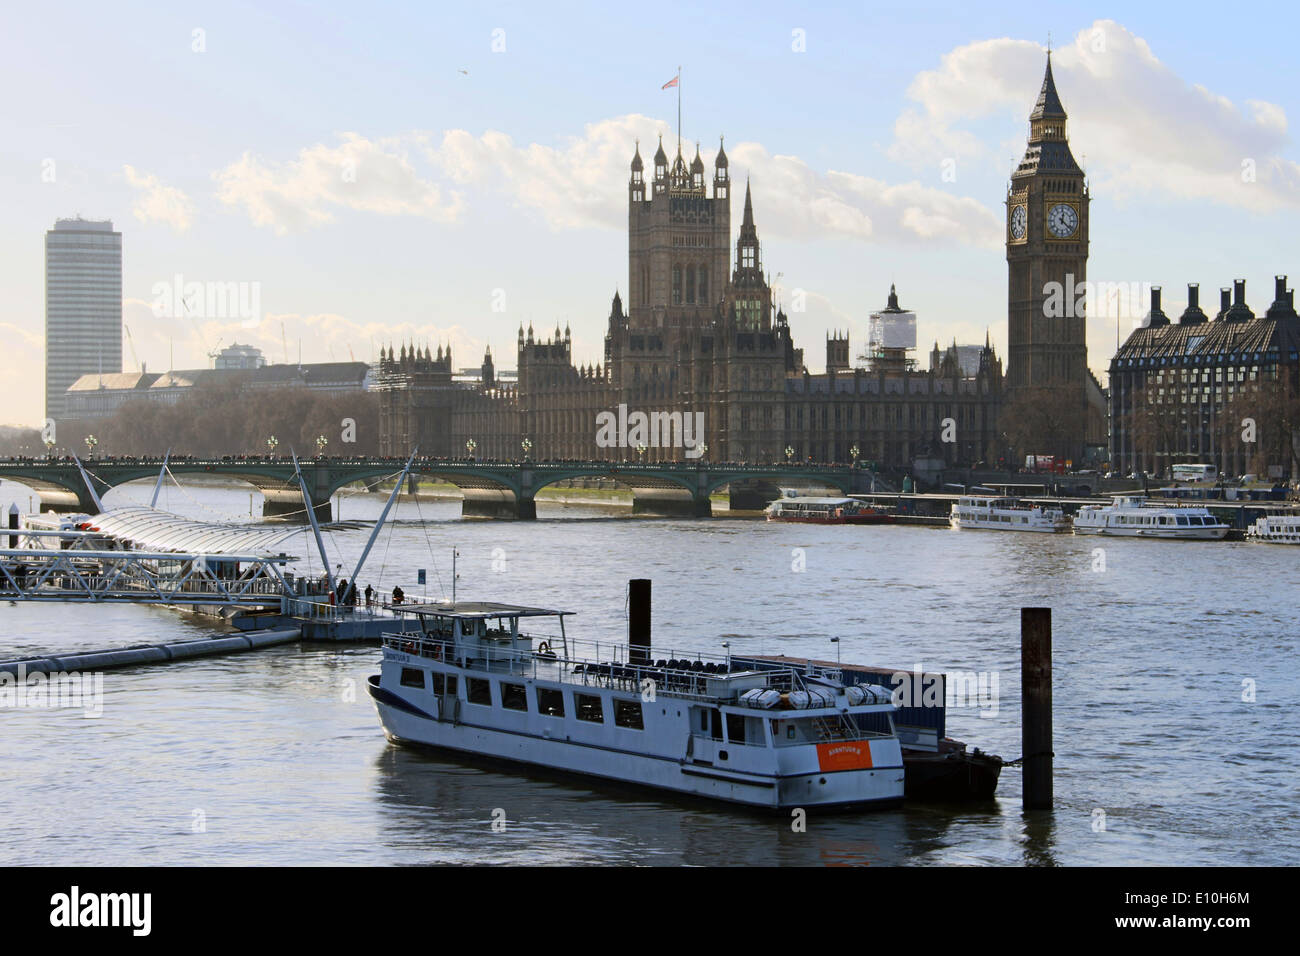 London: Palace of Westminster with Big Ben (Elizabeth Tower) Stock Photo